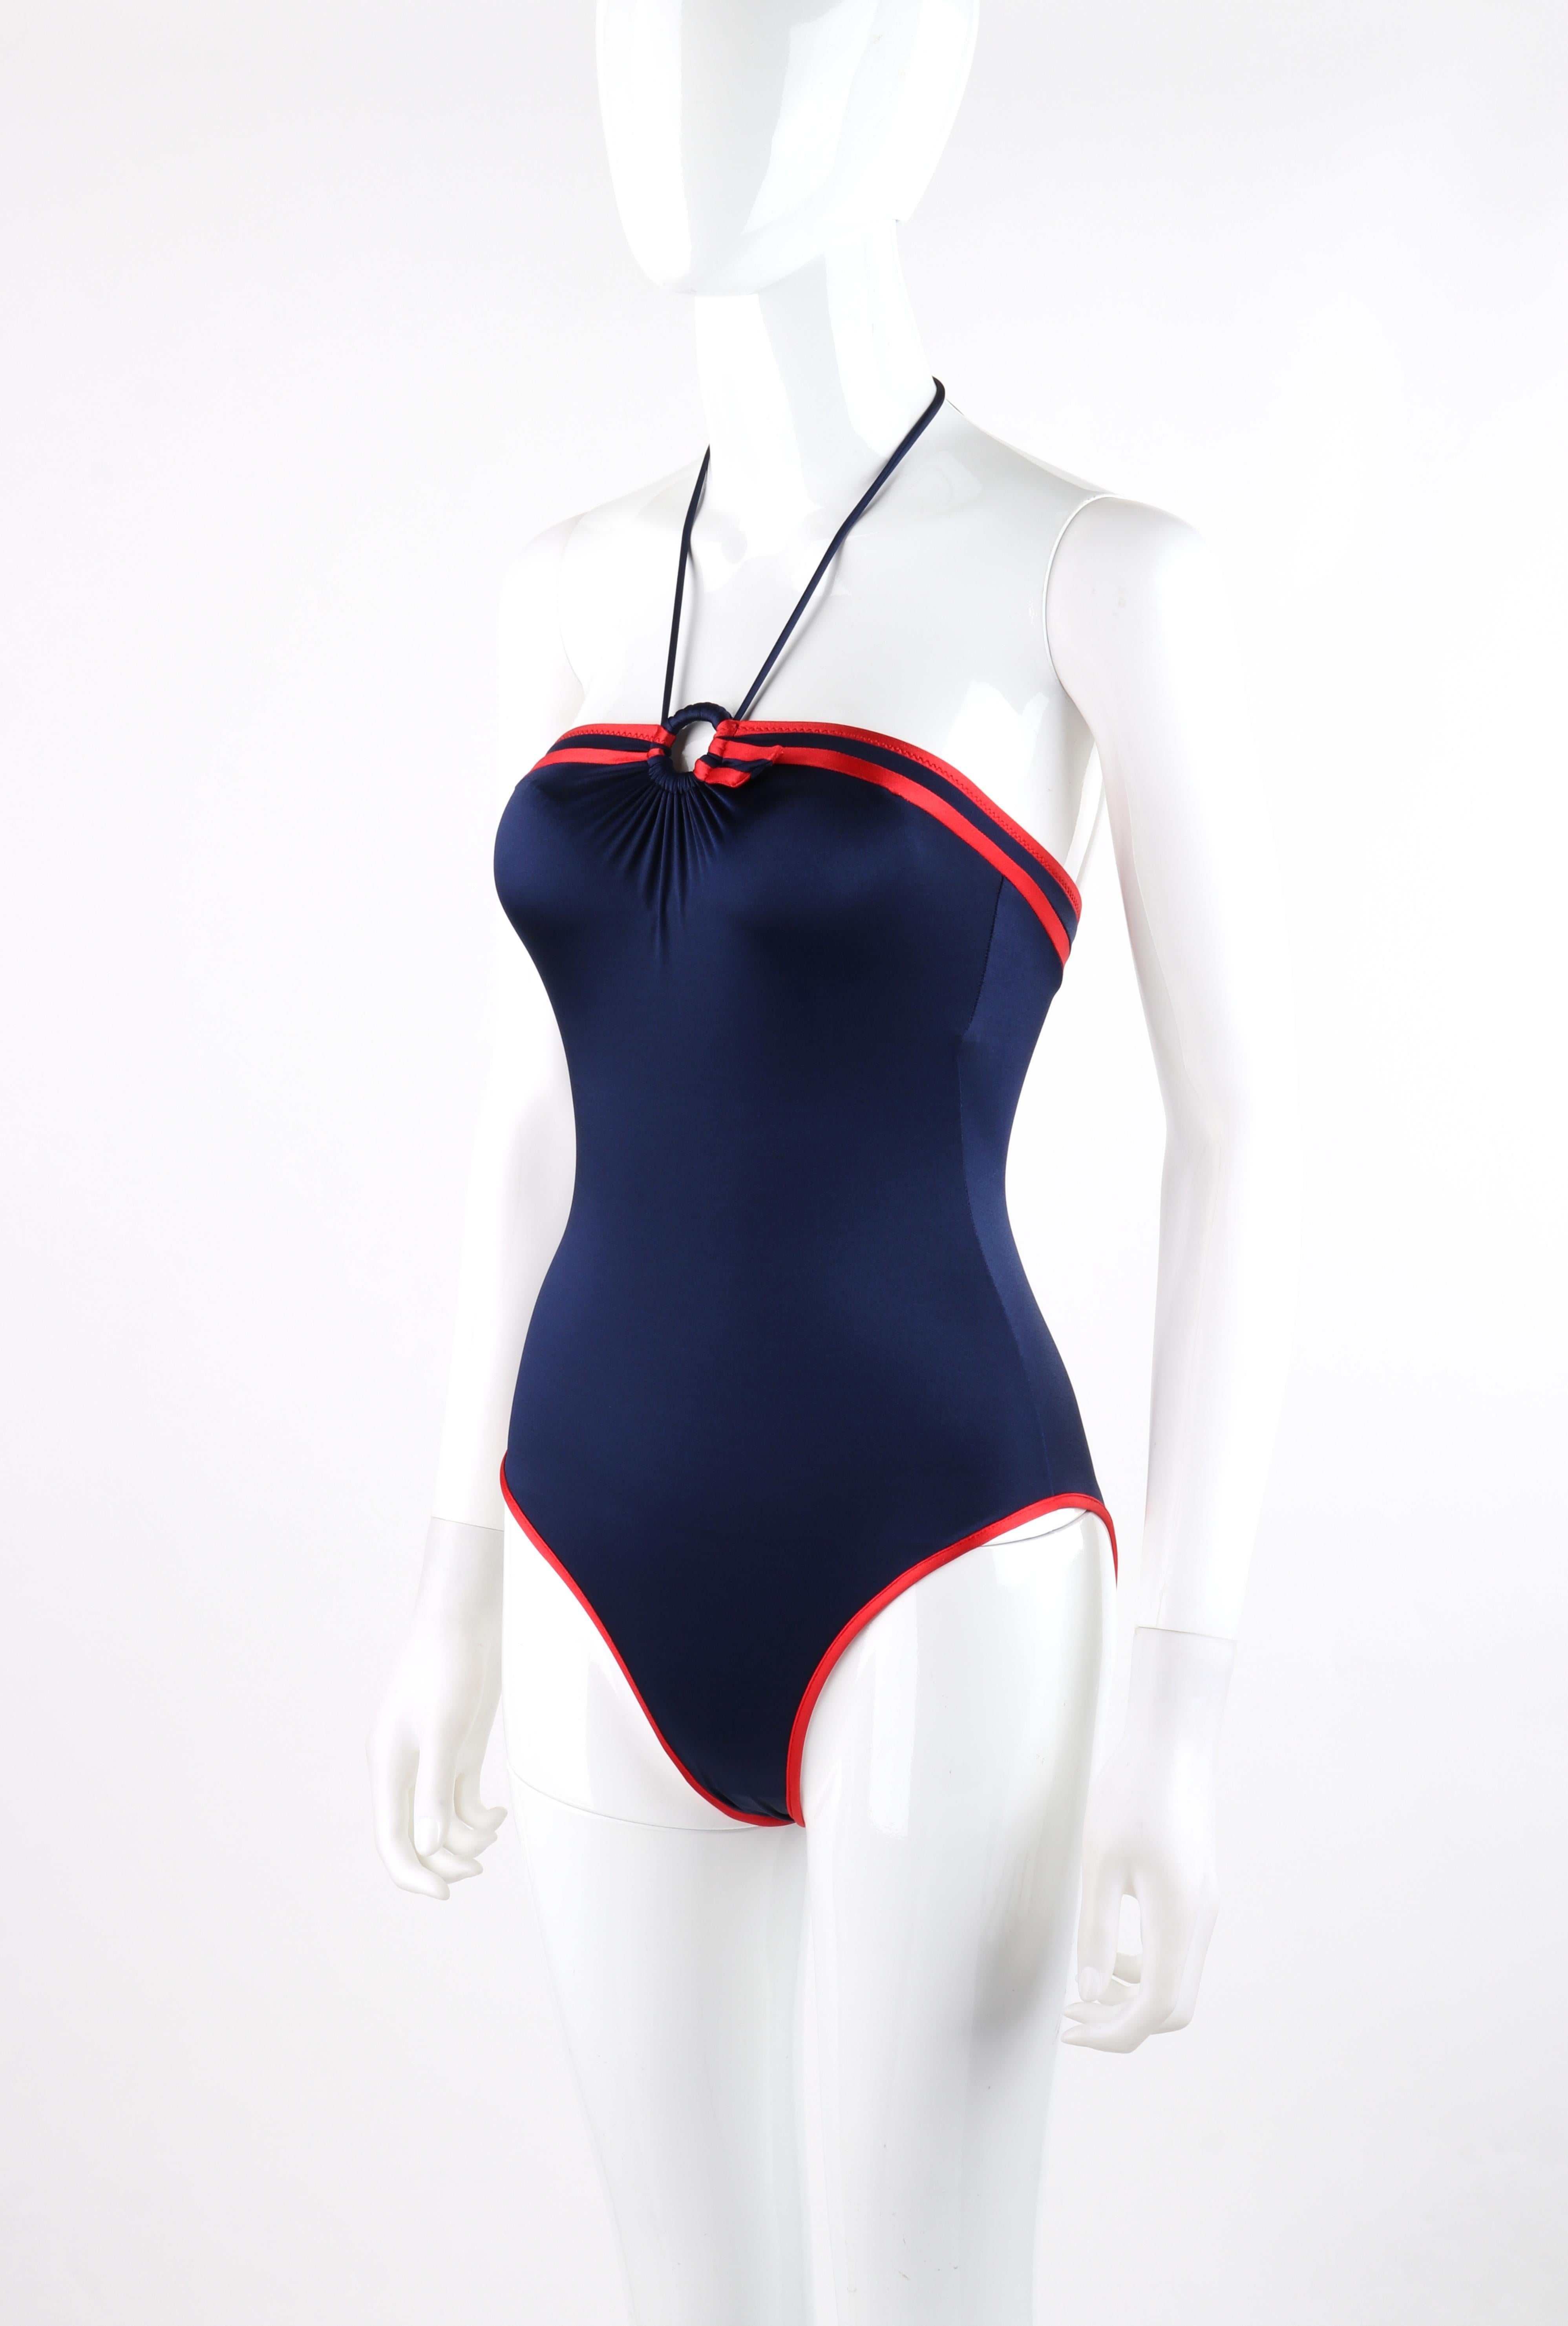 GUCCI c.1980’s Blue Red Trim High Cut Leg Ring Halter 1 Piece Bathing Swimsuit  In Excellent Condition For Sale In Thiensville, WI